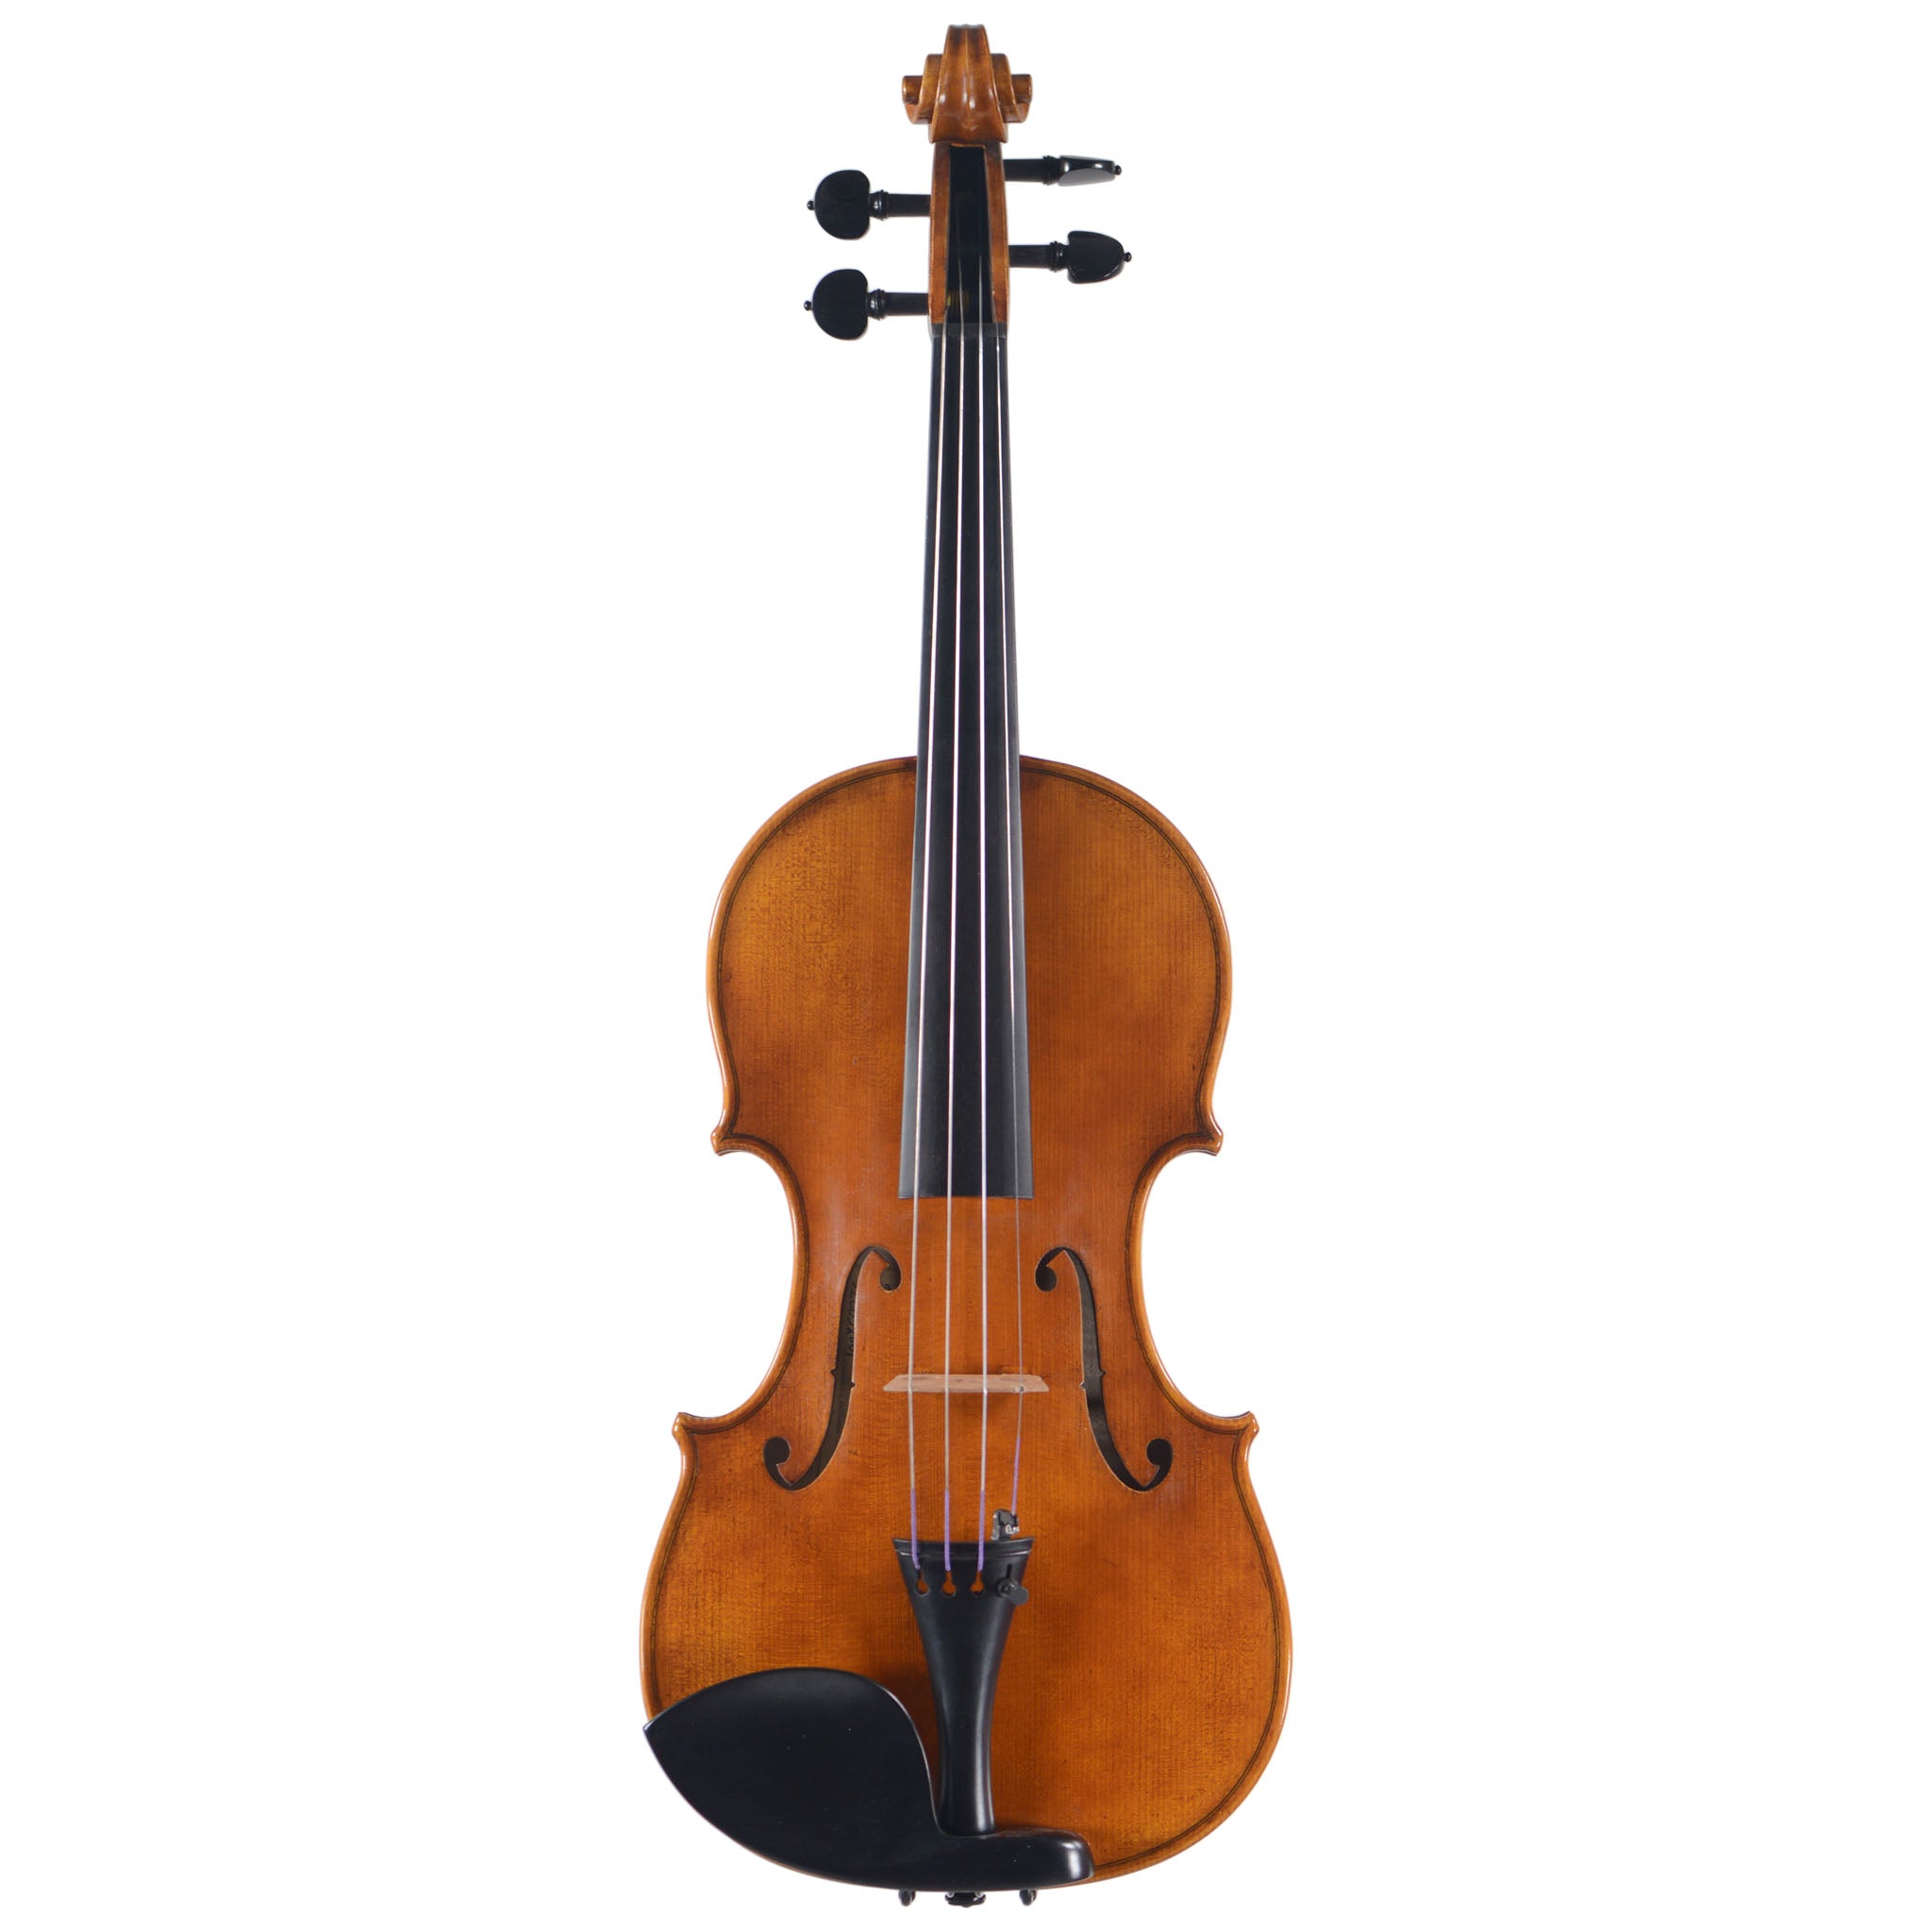 Holstein Bench Cannone 1743 Violin with Antique Finish